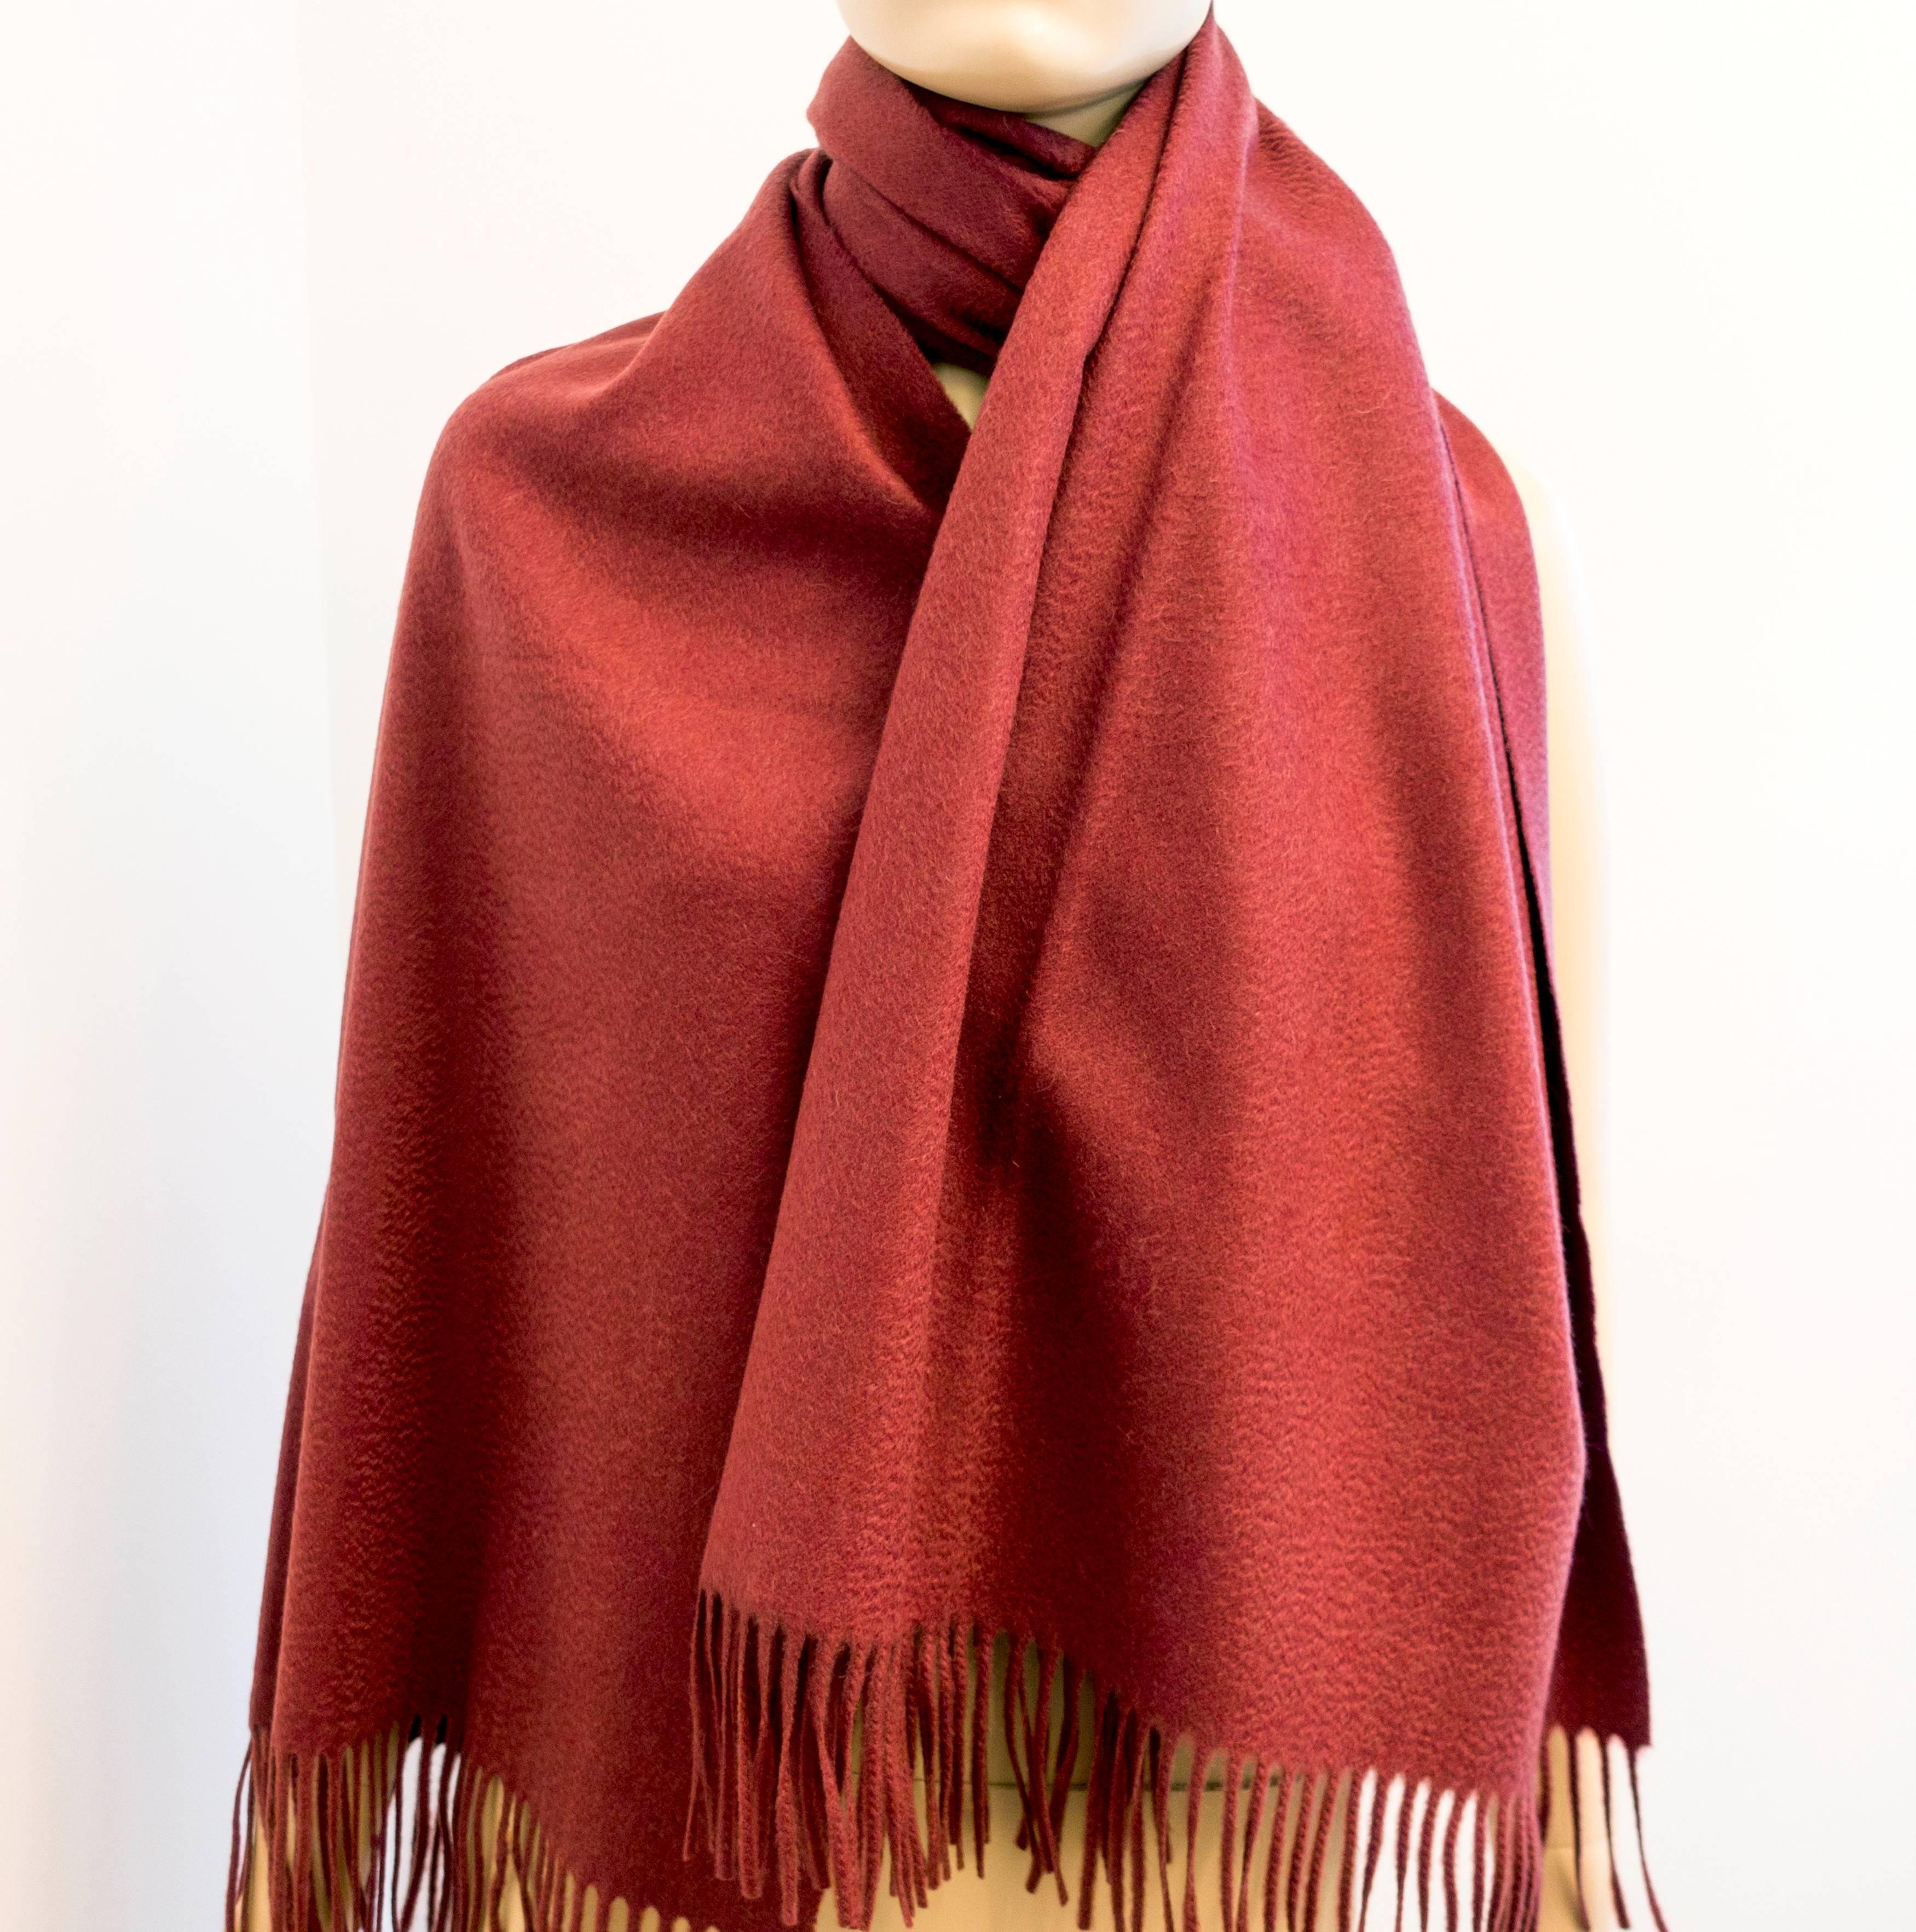 Hermes Rouge H Double Faced Cashmere Stole Scarf Shawl Unisex Gorgeous Gift 1